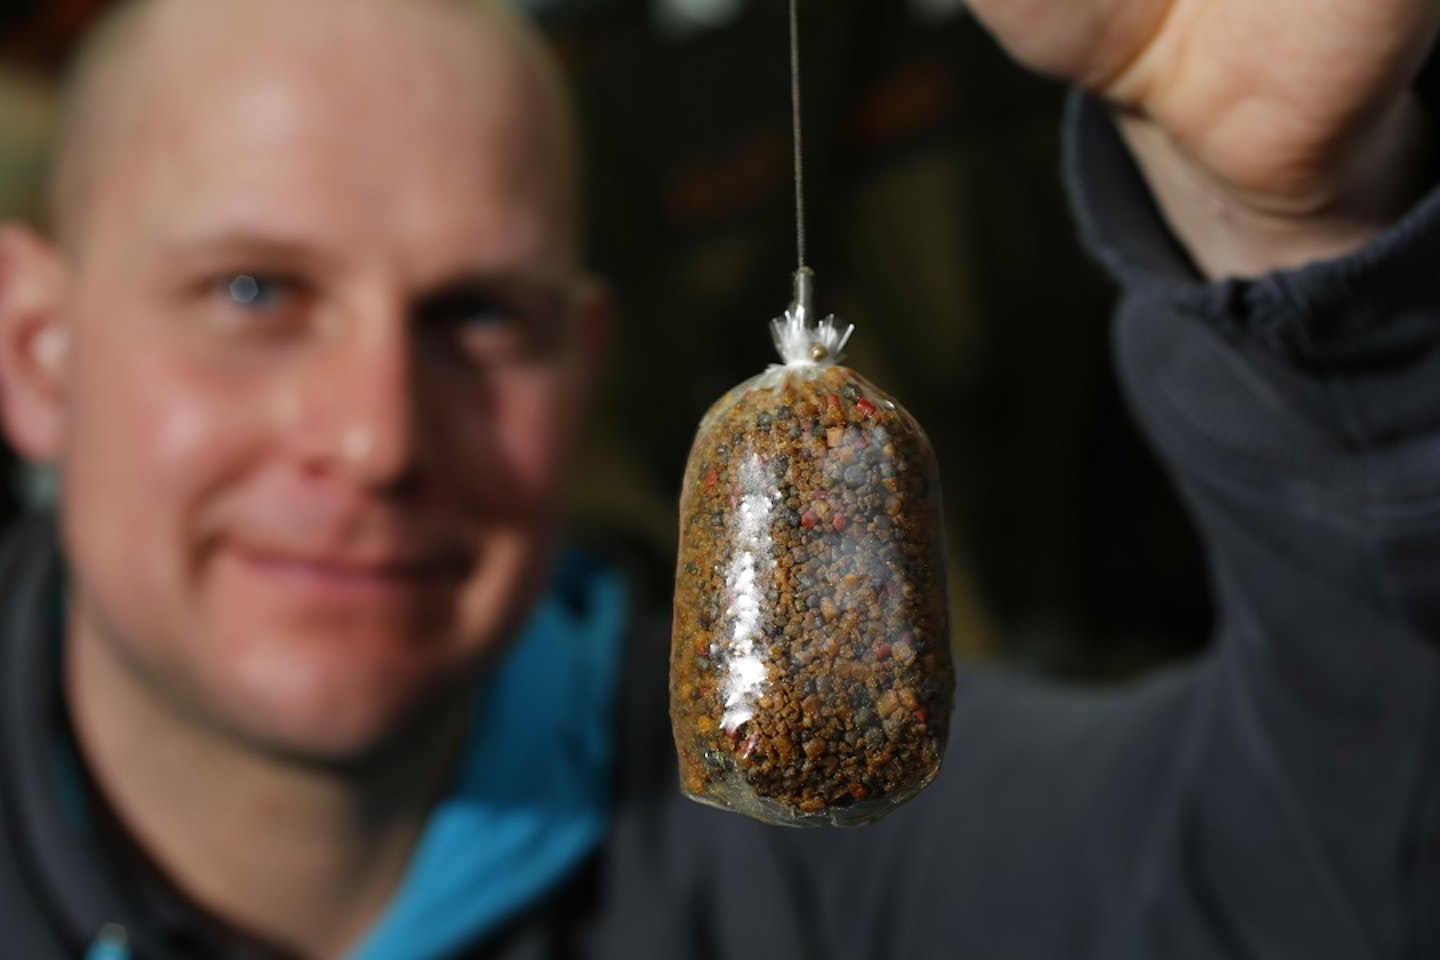 Kev Hewitt's foolproof guide to solid PVA bags